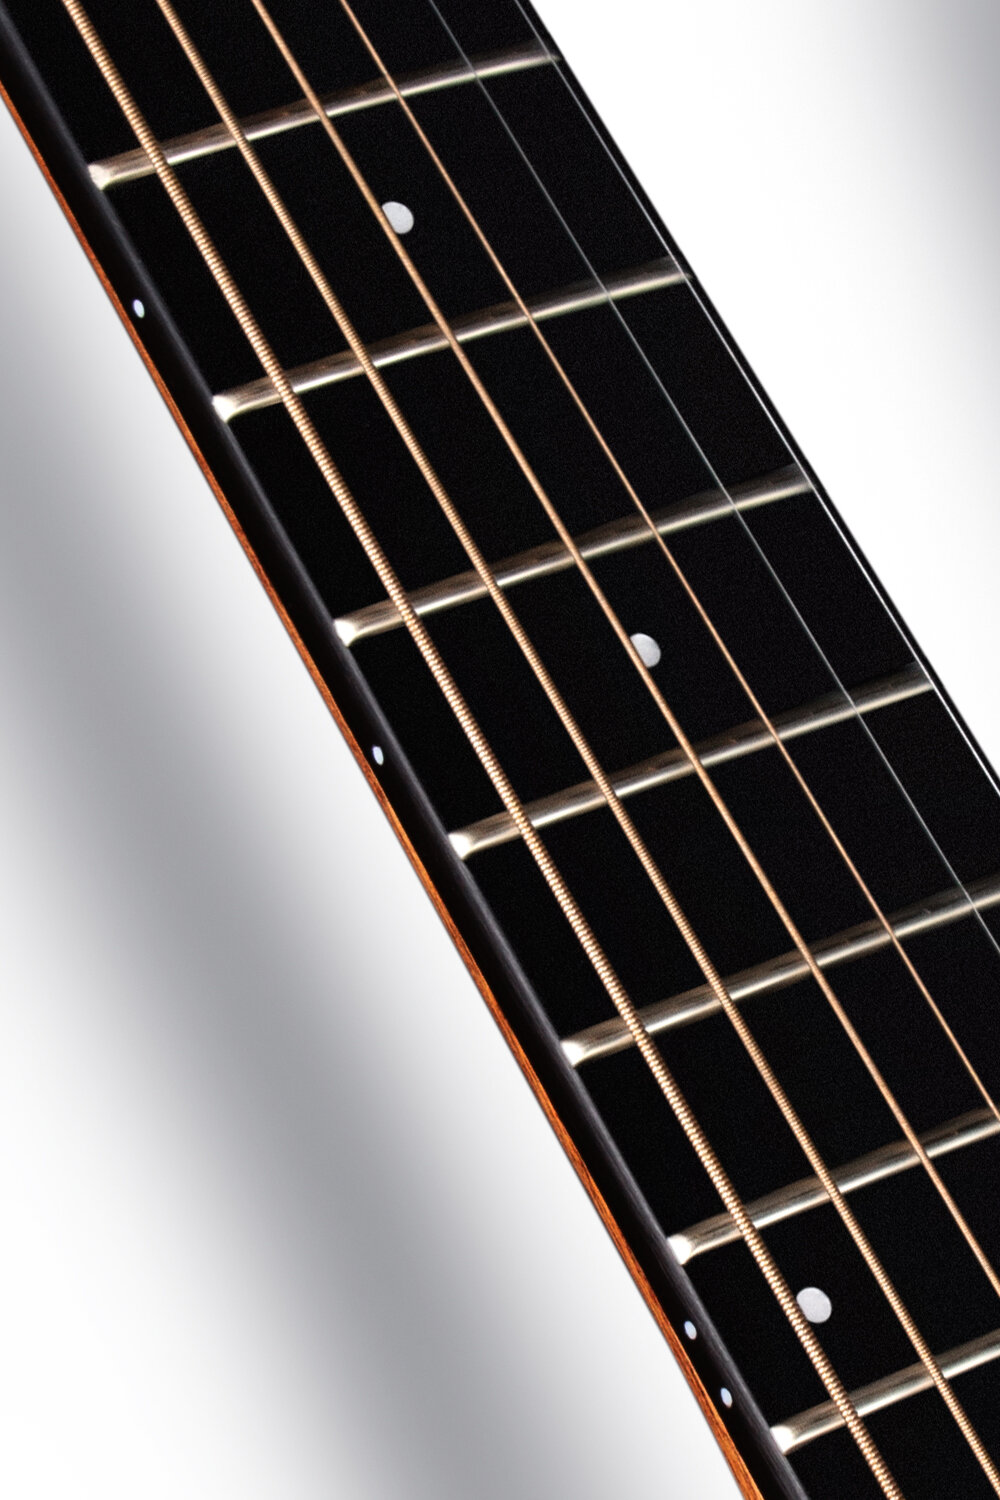 Smooth playability - Each fret wires has been finely polished, making the frets' round end and smooth, perfect touching feeling while playing!As smooth as you play!